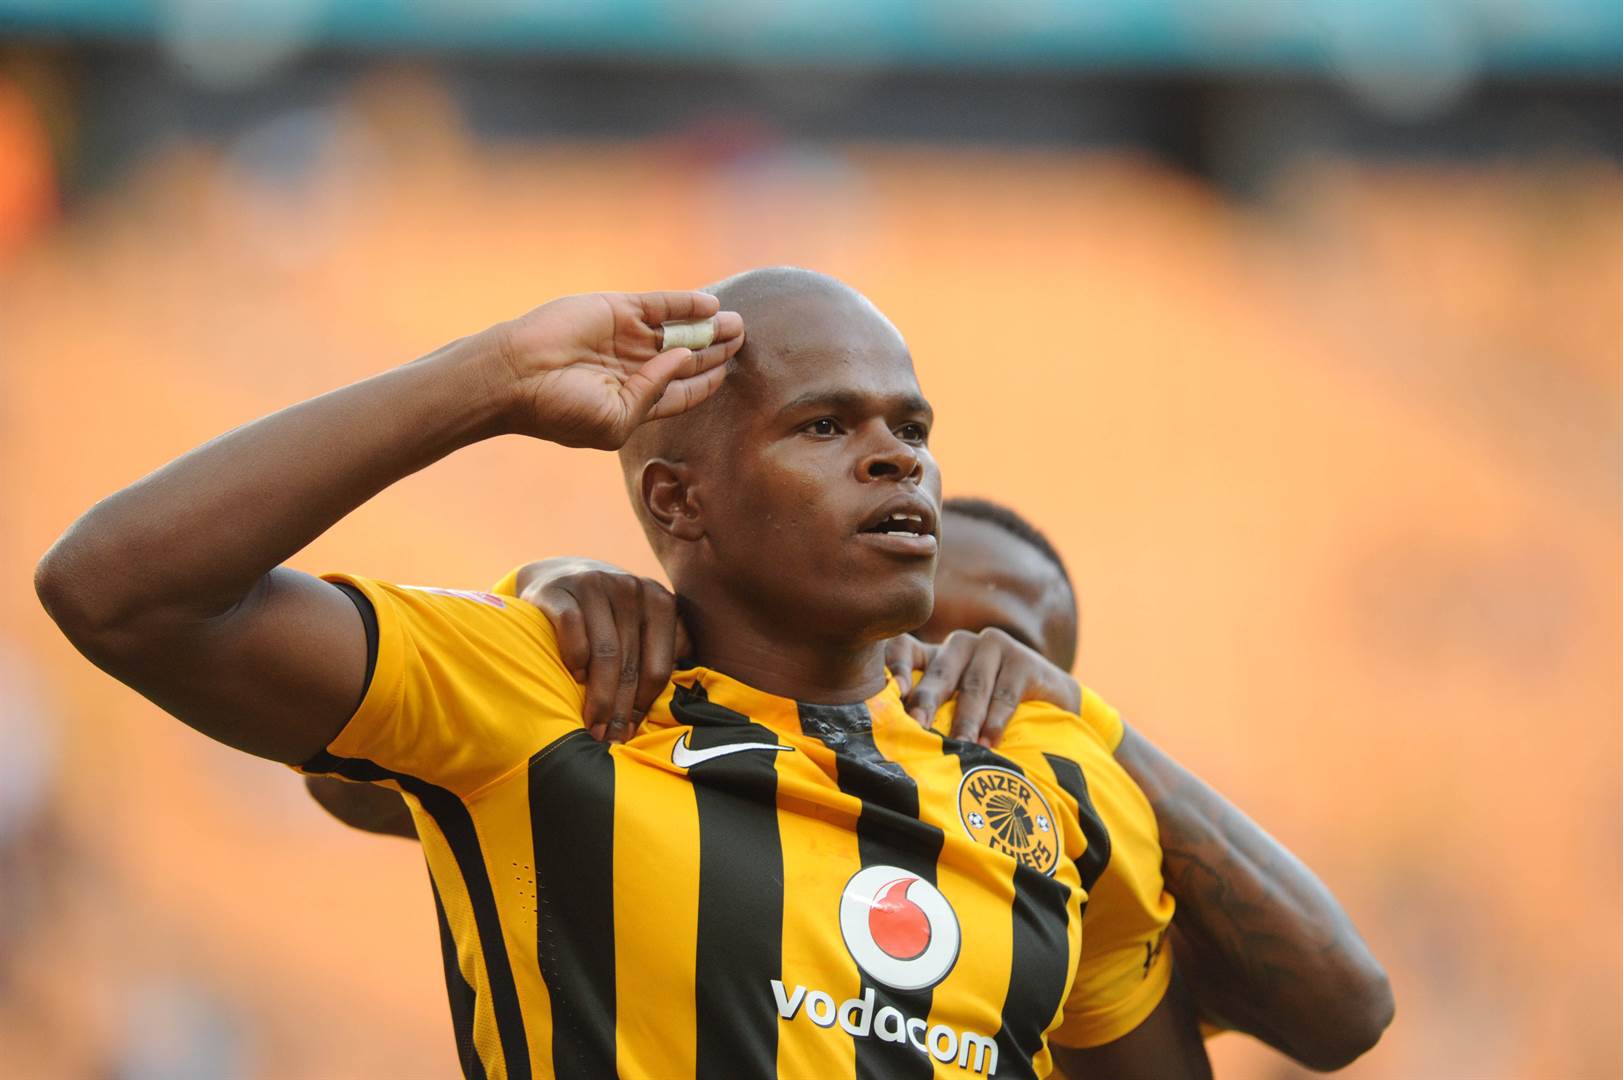 Katsande spent a decade at Chiefs playing over 300